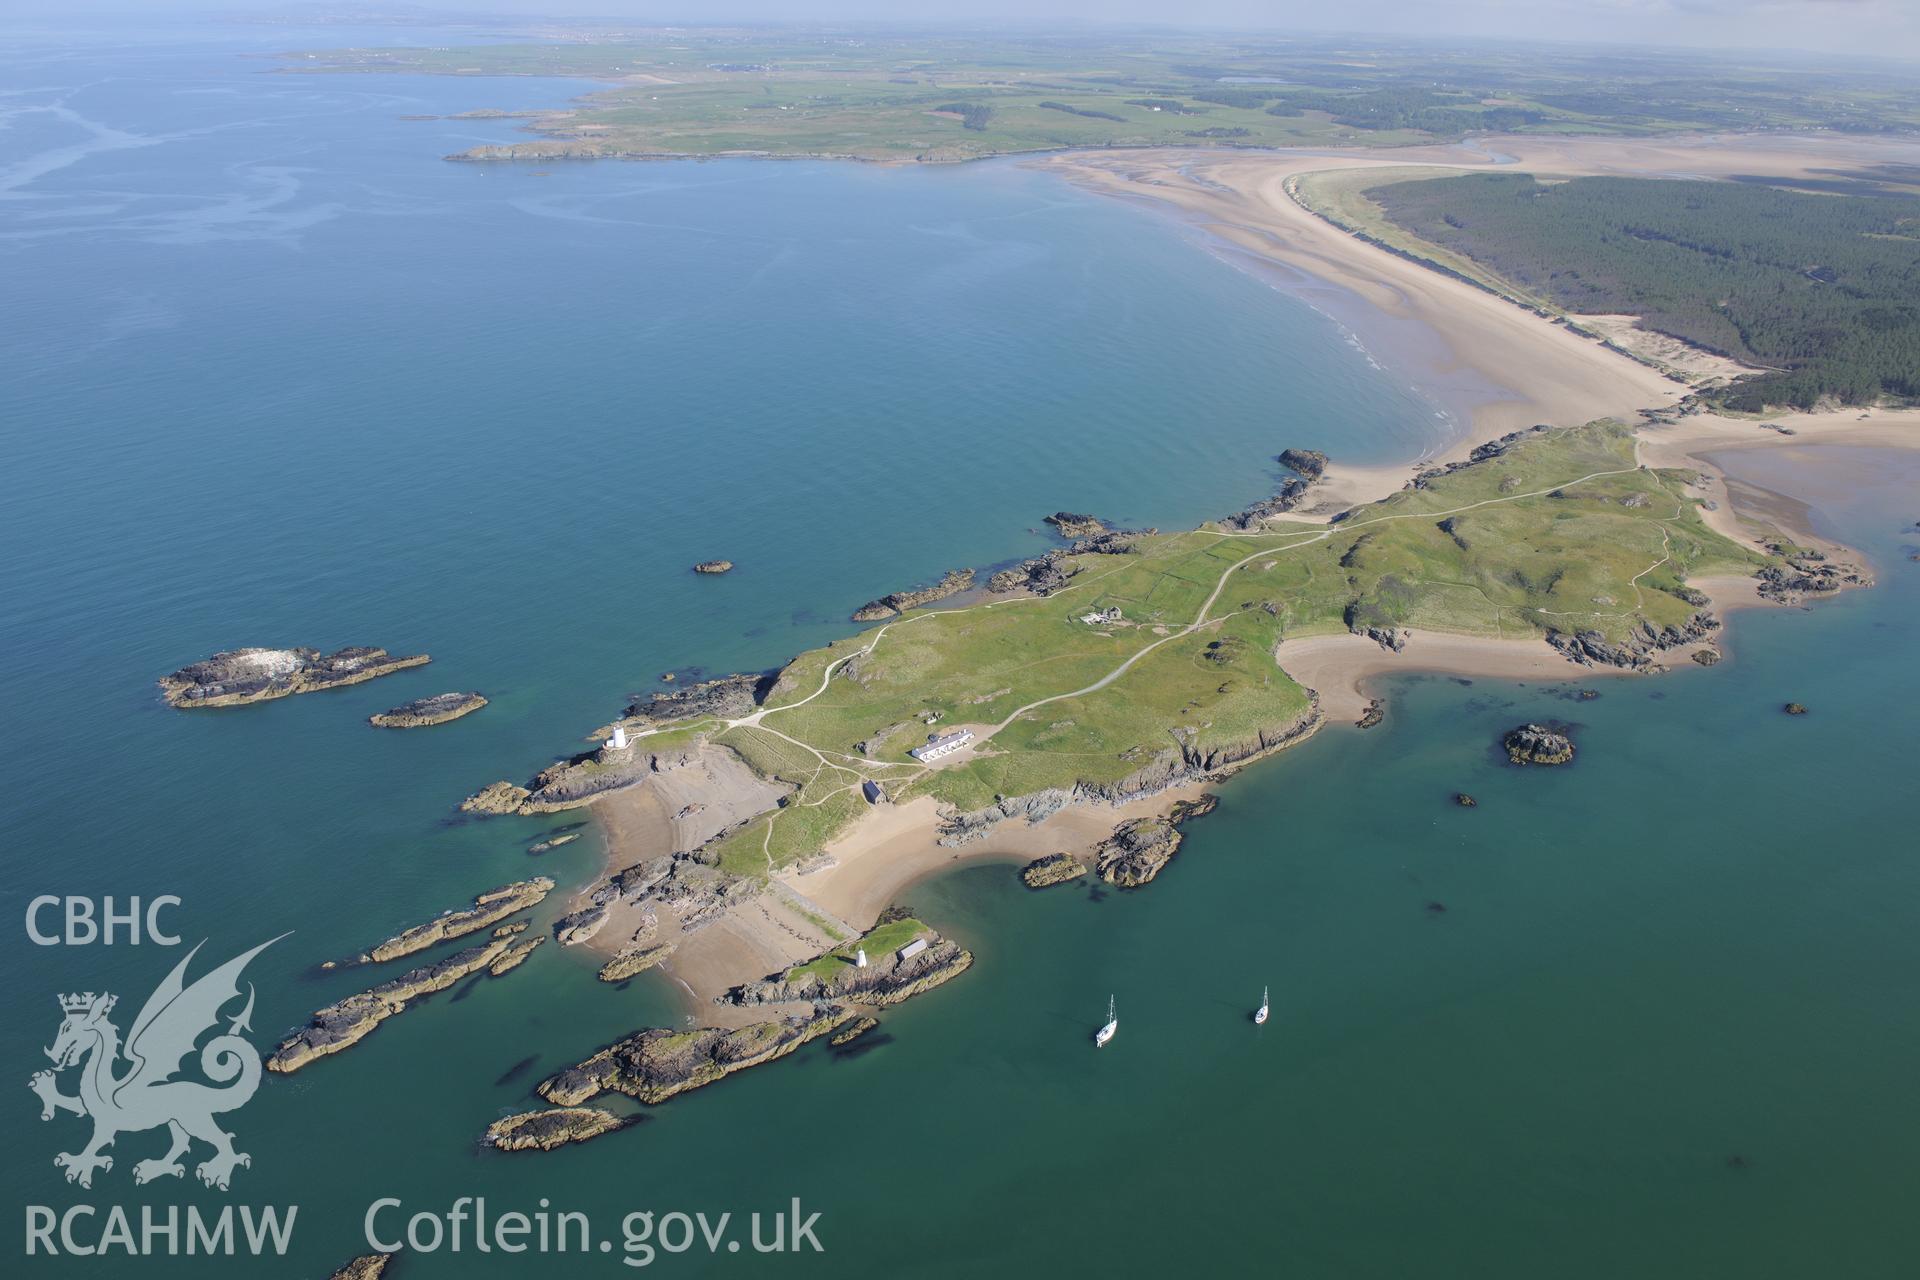 Llanddwyn Island, with Ynys yr Adar beyond (larger of the small islands). Oblique aerial photograph taken during the Royal Commission's programme of archaeological aerial reconnaissance by Toby Driver on 23rd June 2015.